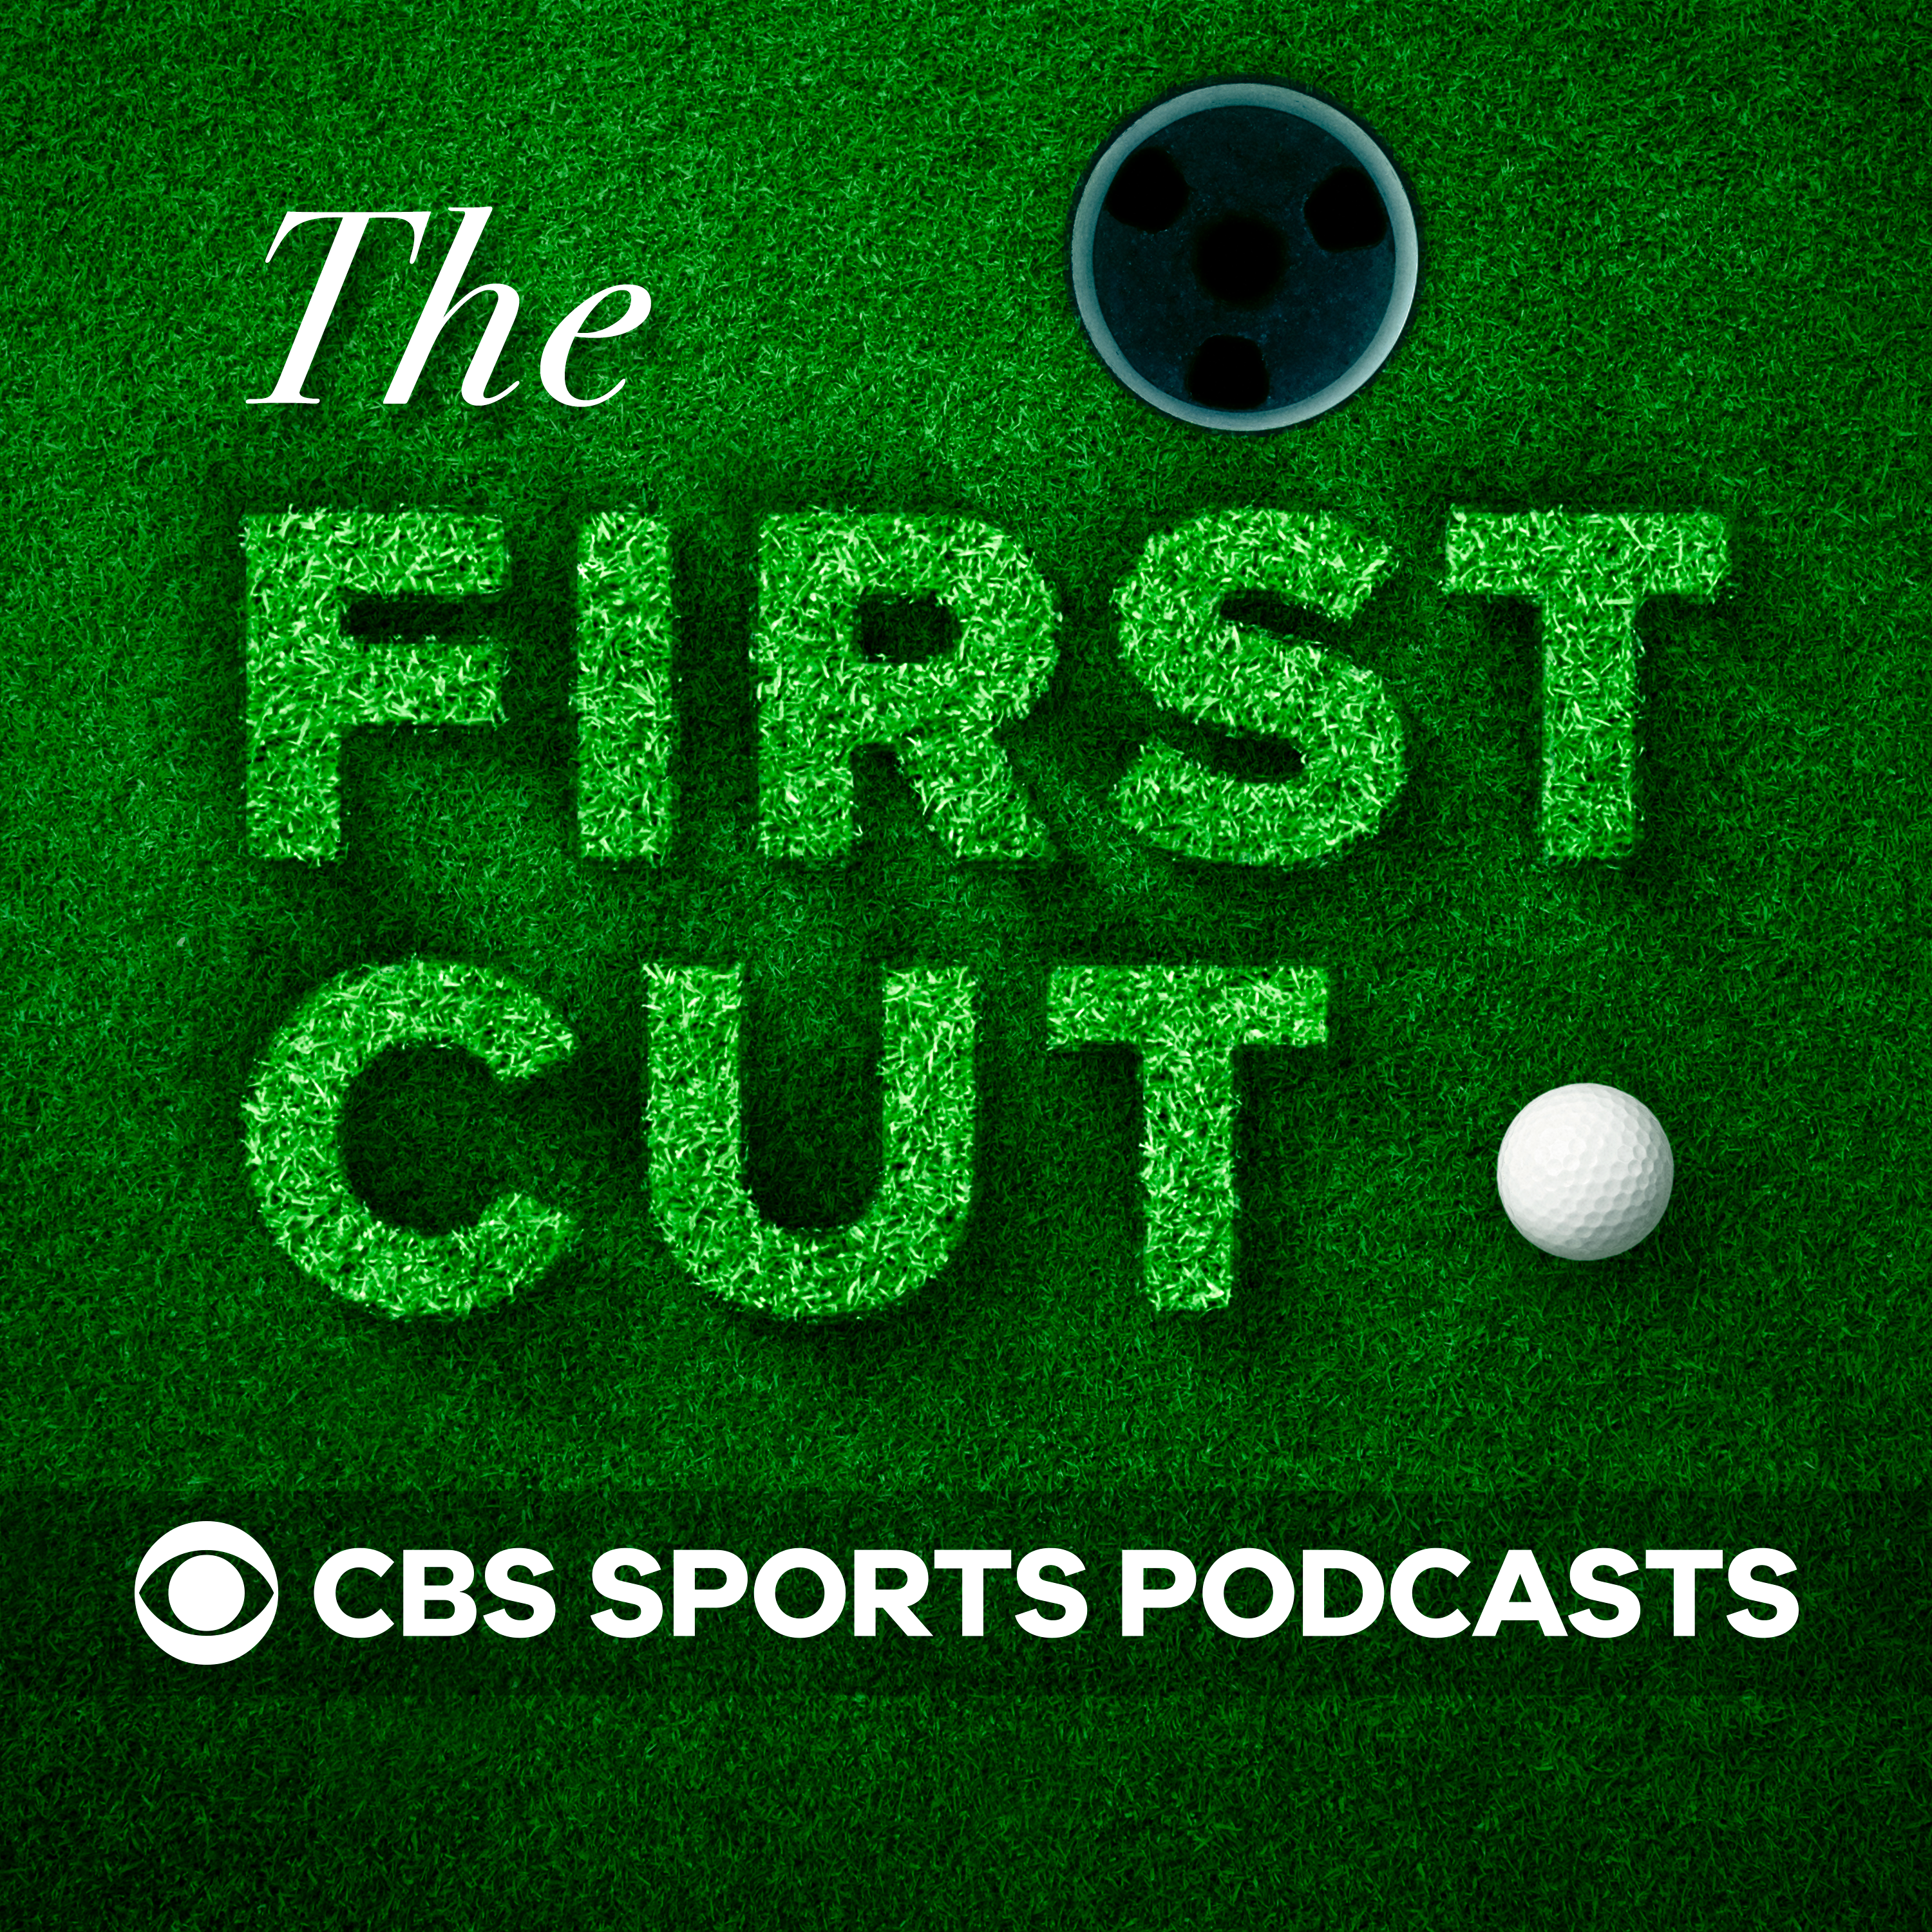 The First Cut Golf Podcast - CBS Sports Podcasts